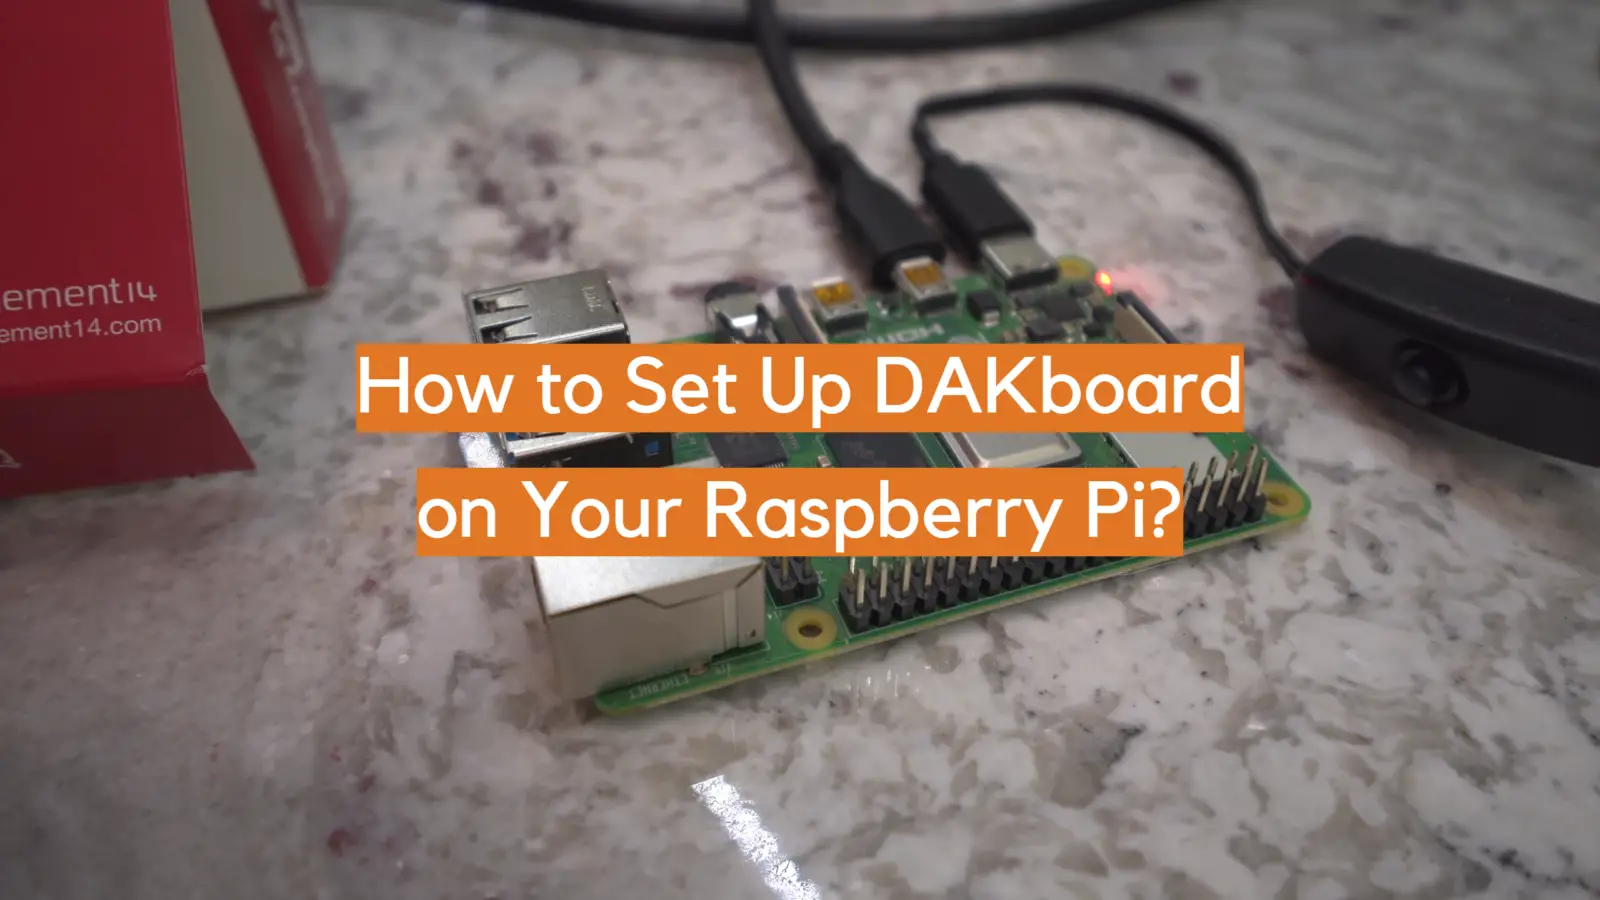 How to Set Up DAKboard on Your Raspberry Pi?